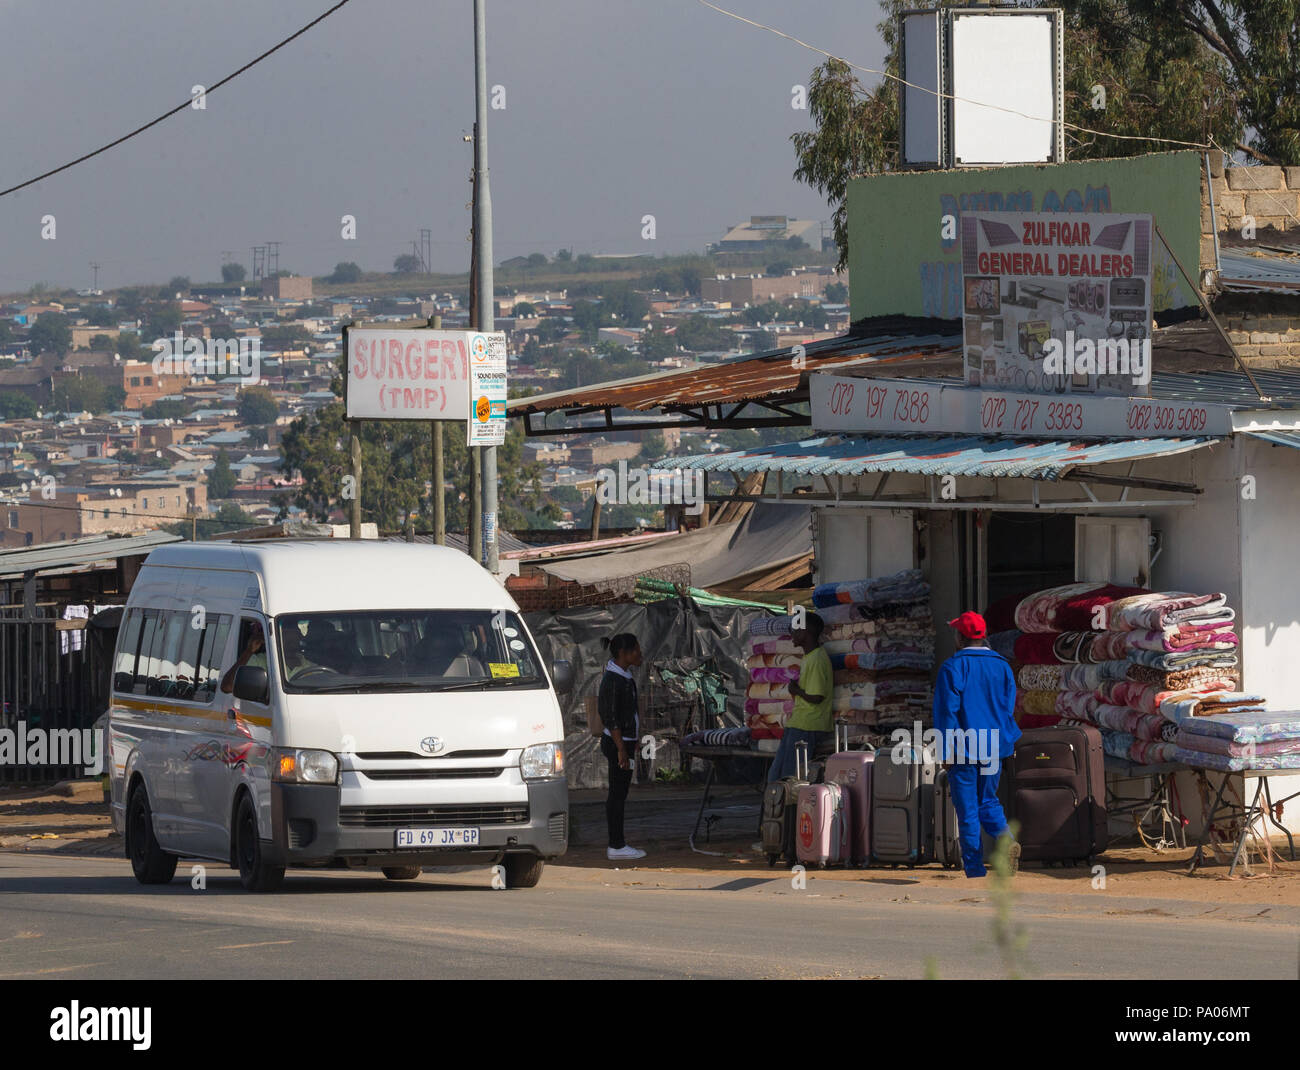 General dealer small business,retailer in Africa,with black taxi in township Diepsloot north of Johannesburg in South Africa with people in the street Stock Photo